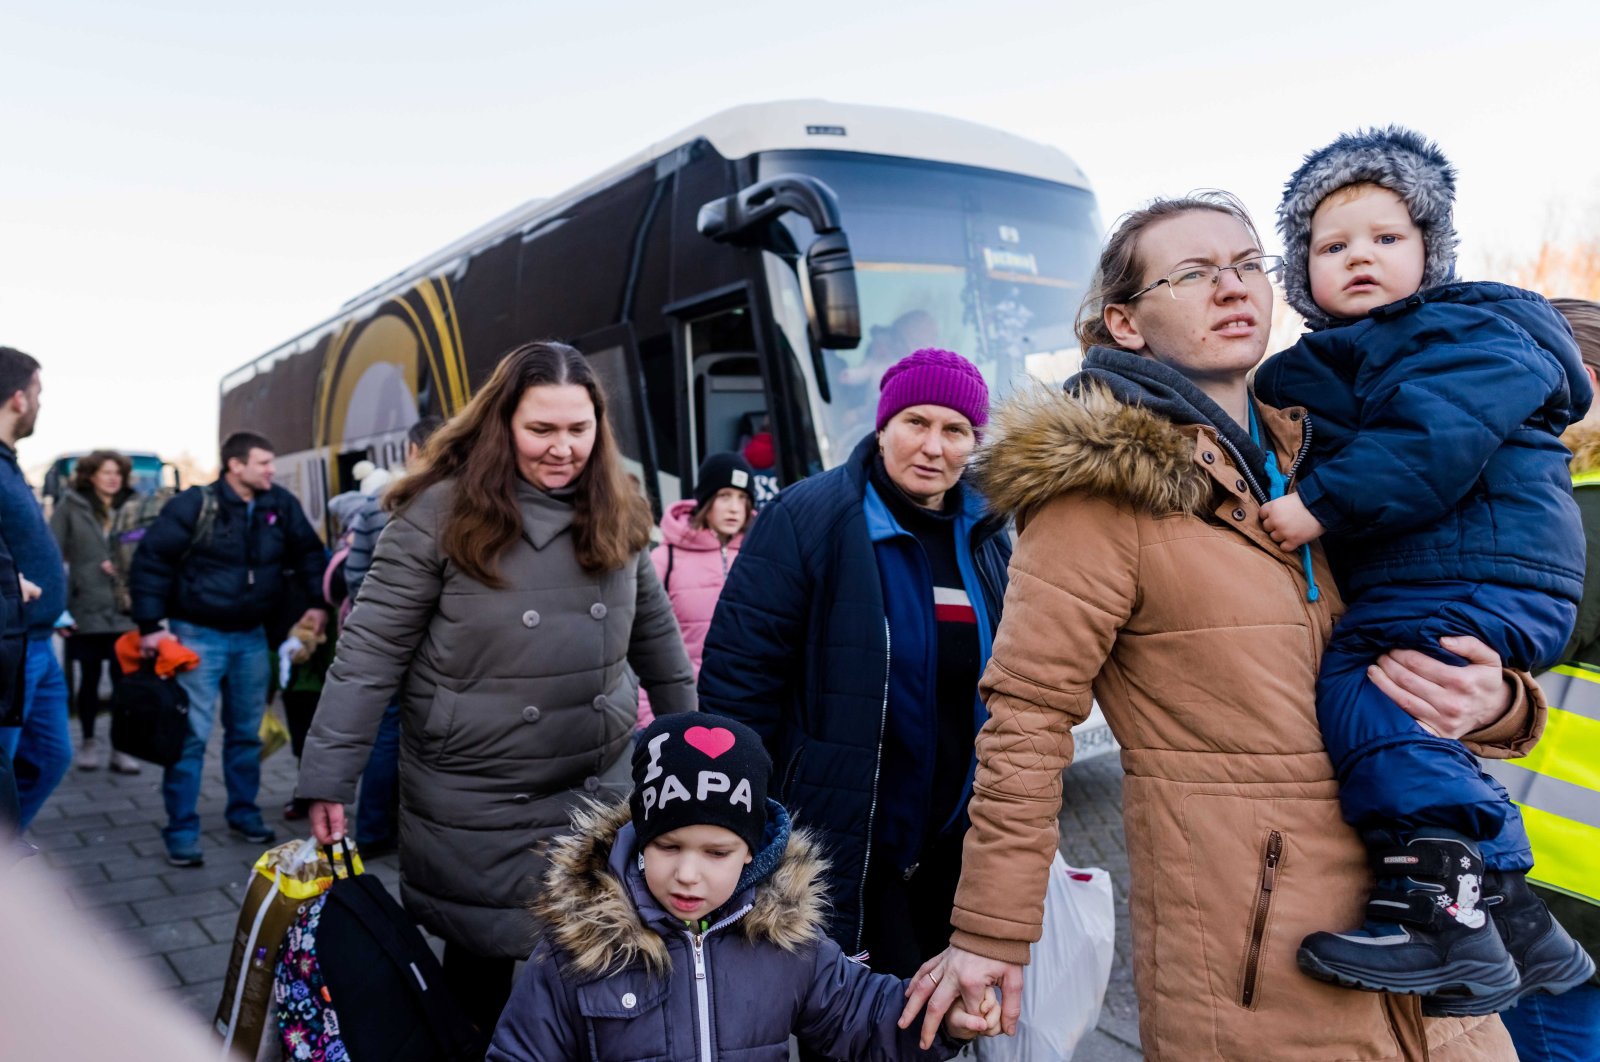 Ukrainian refugees arrive by bus at the Sports hall De Dreef in Waddinxveen, the Netherlands, March 4, 2022. (EPA File Photo)